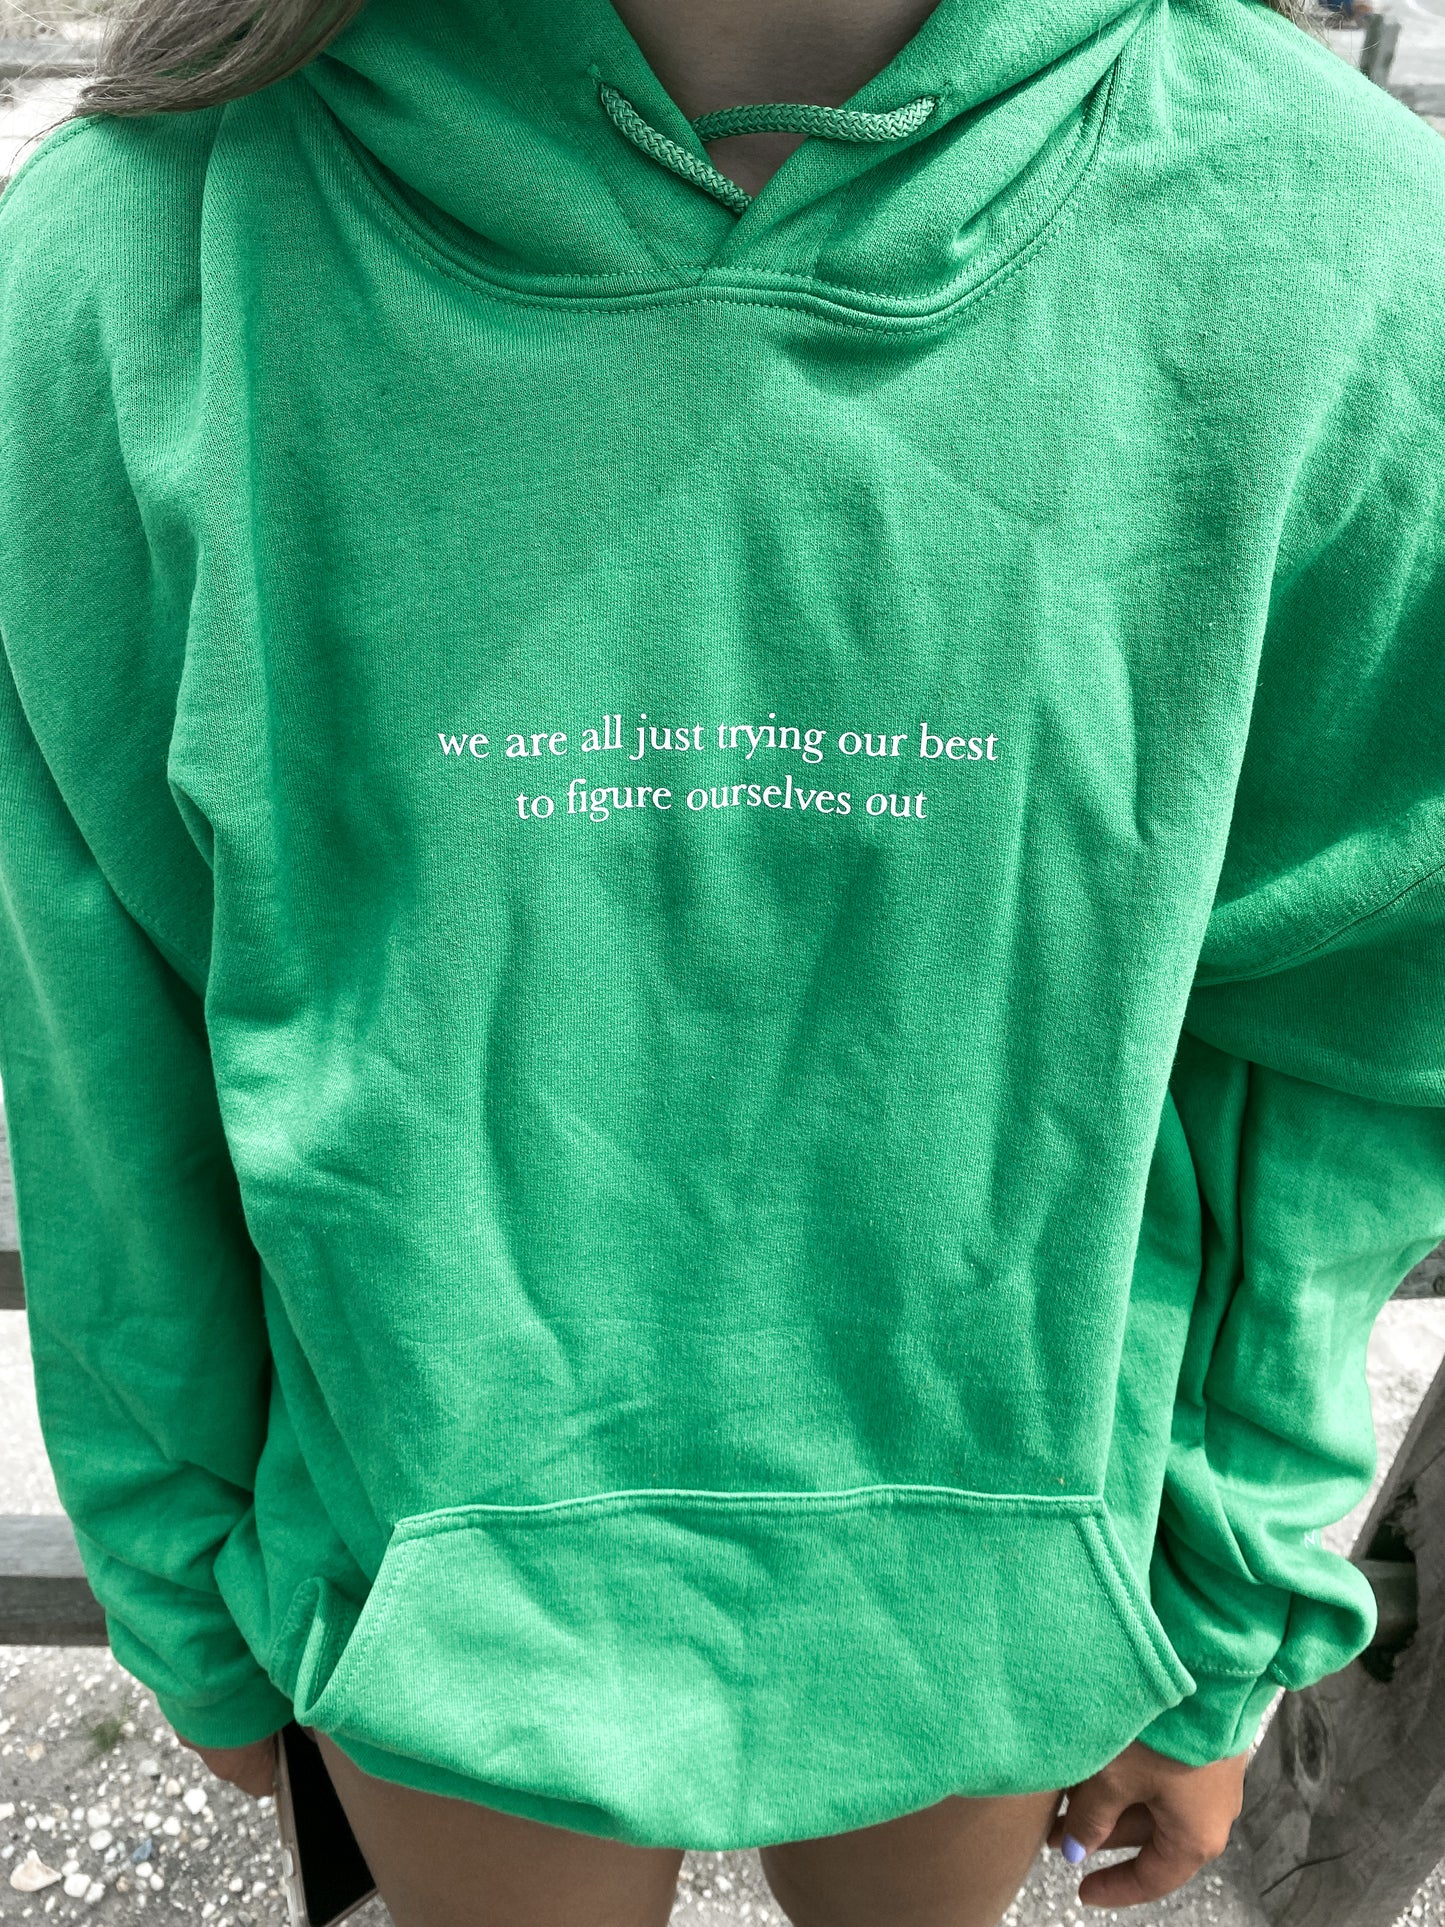 Trying to figure ourselves out sweatshirt